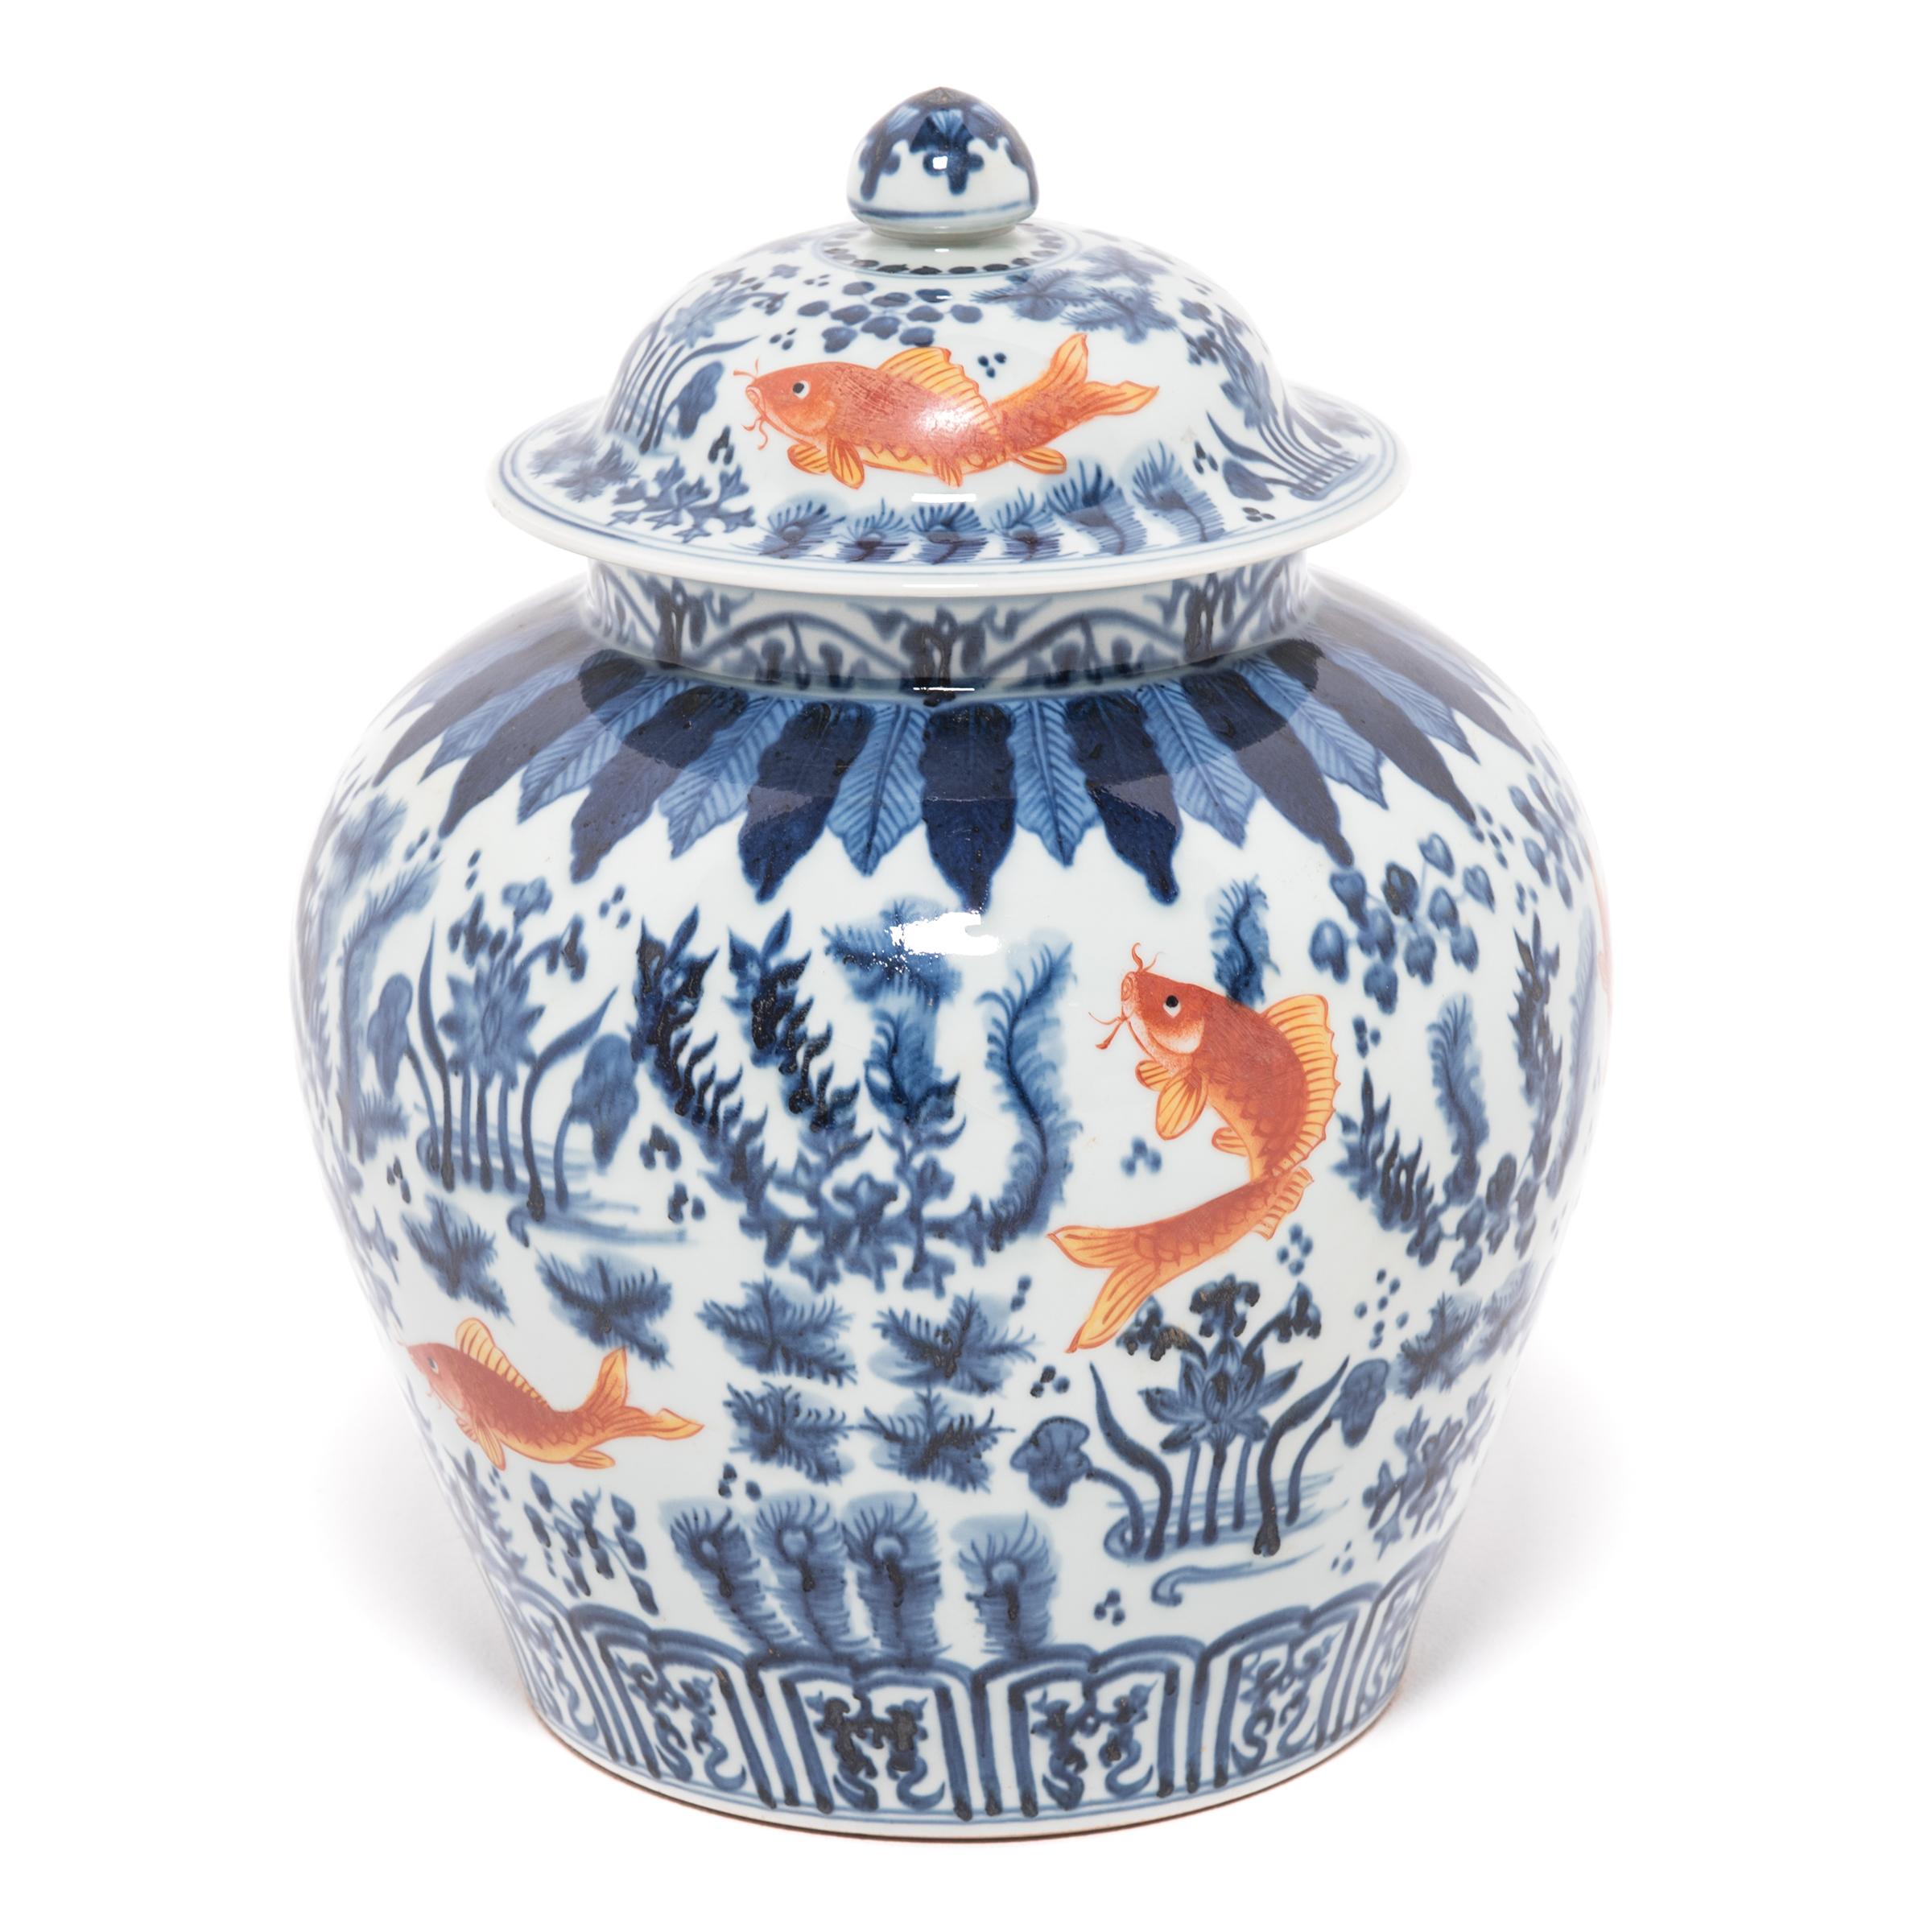 Revered for centuries for its elegant designs of rich cobalt blue and pure white, traditional Chinese blue and white porcelain lives on in this covered jar hand painted with fish and flora of the sea, traditional symbols of prosperity and harmony.